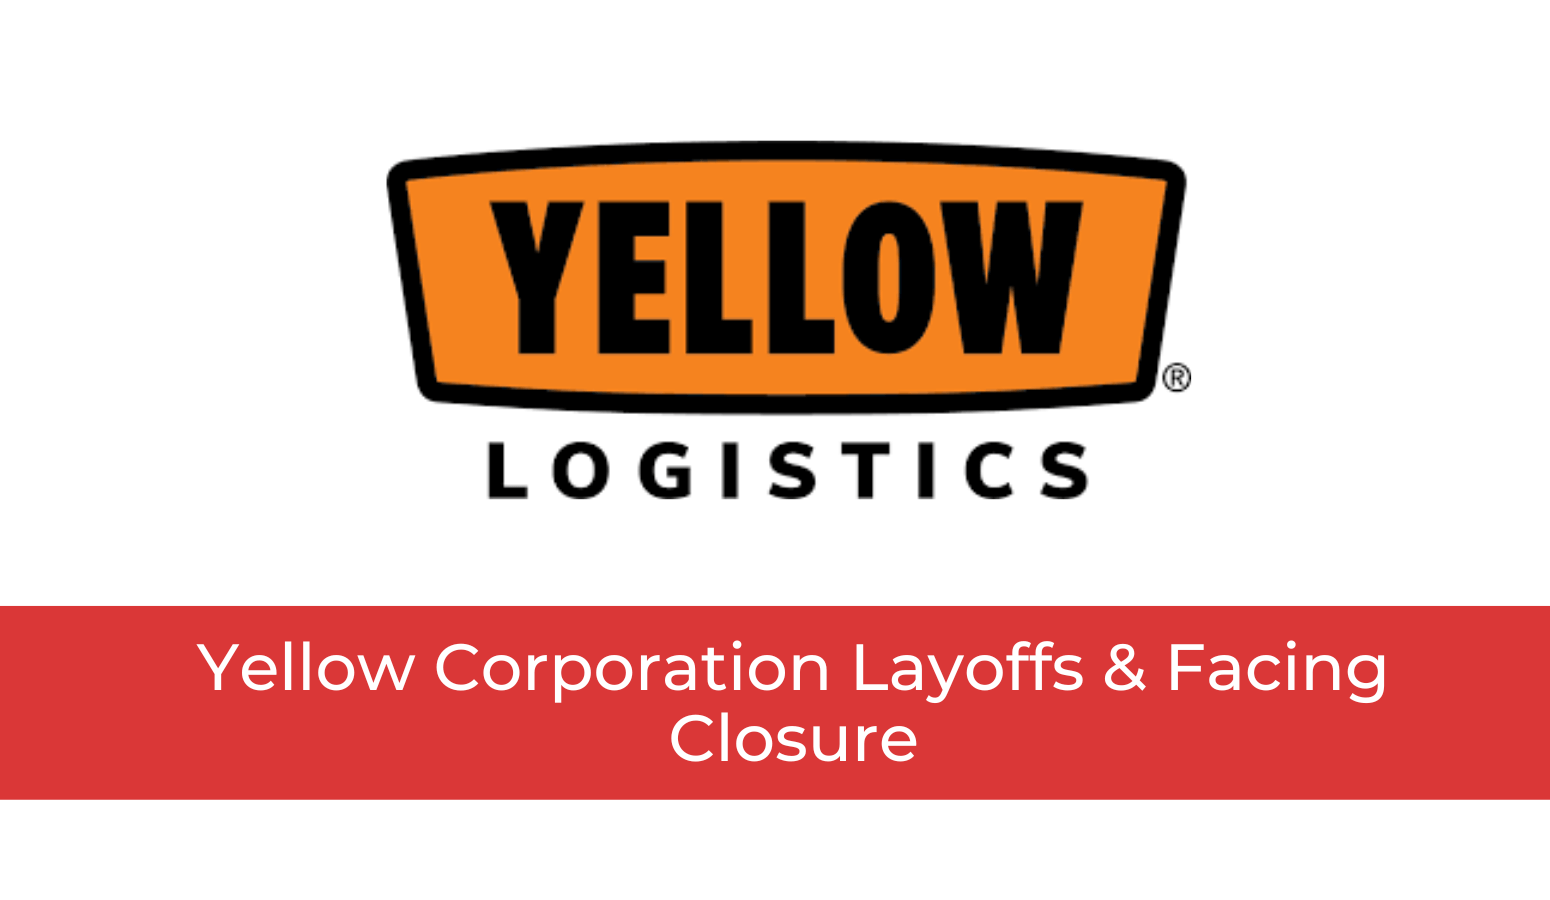 Featured image for “Yellow Corporation Layoffs & Facing Closure”